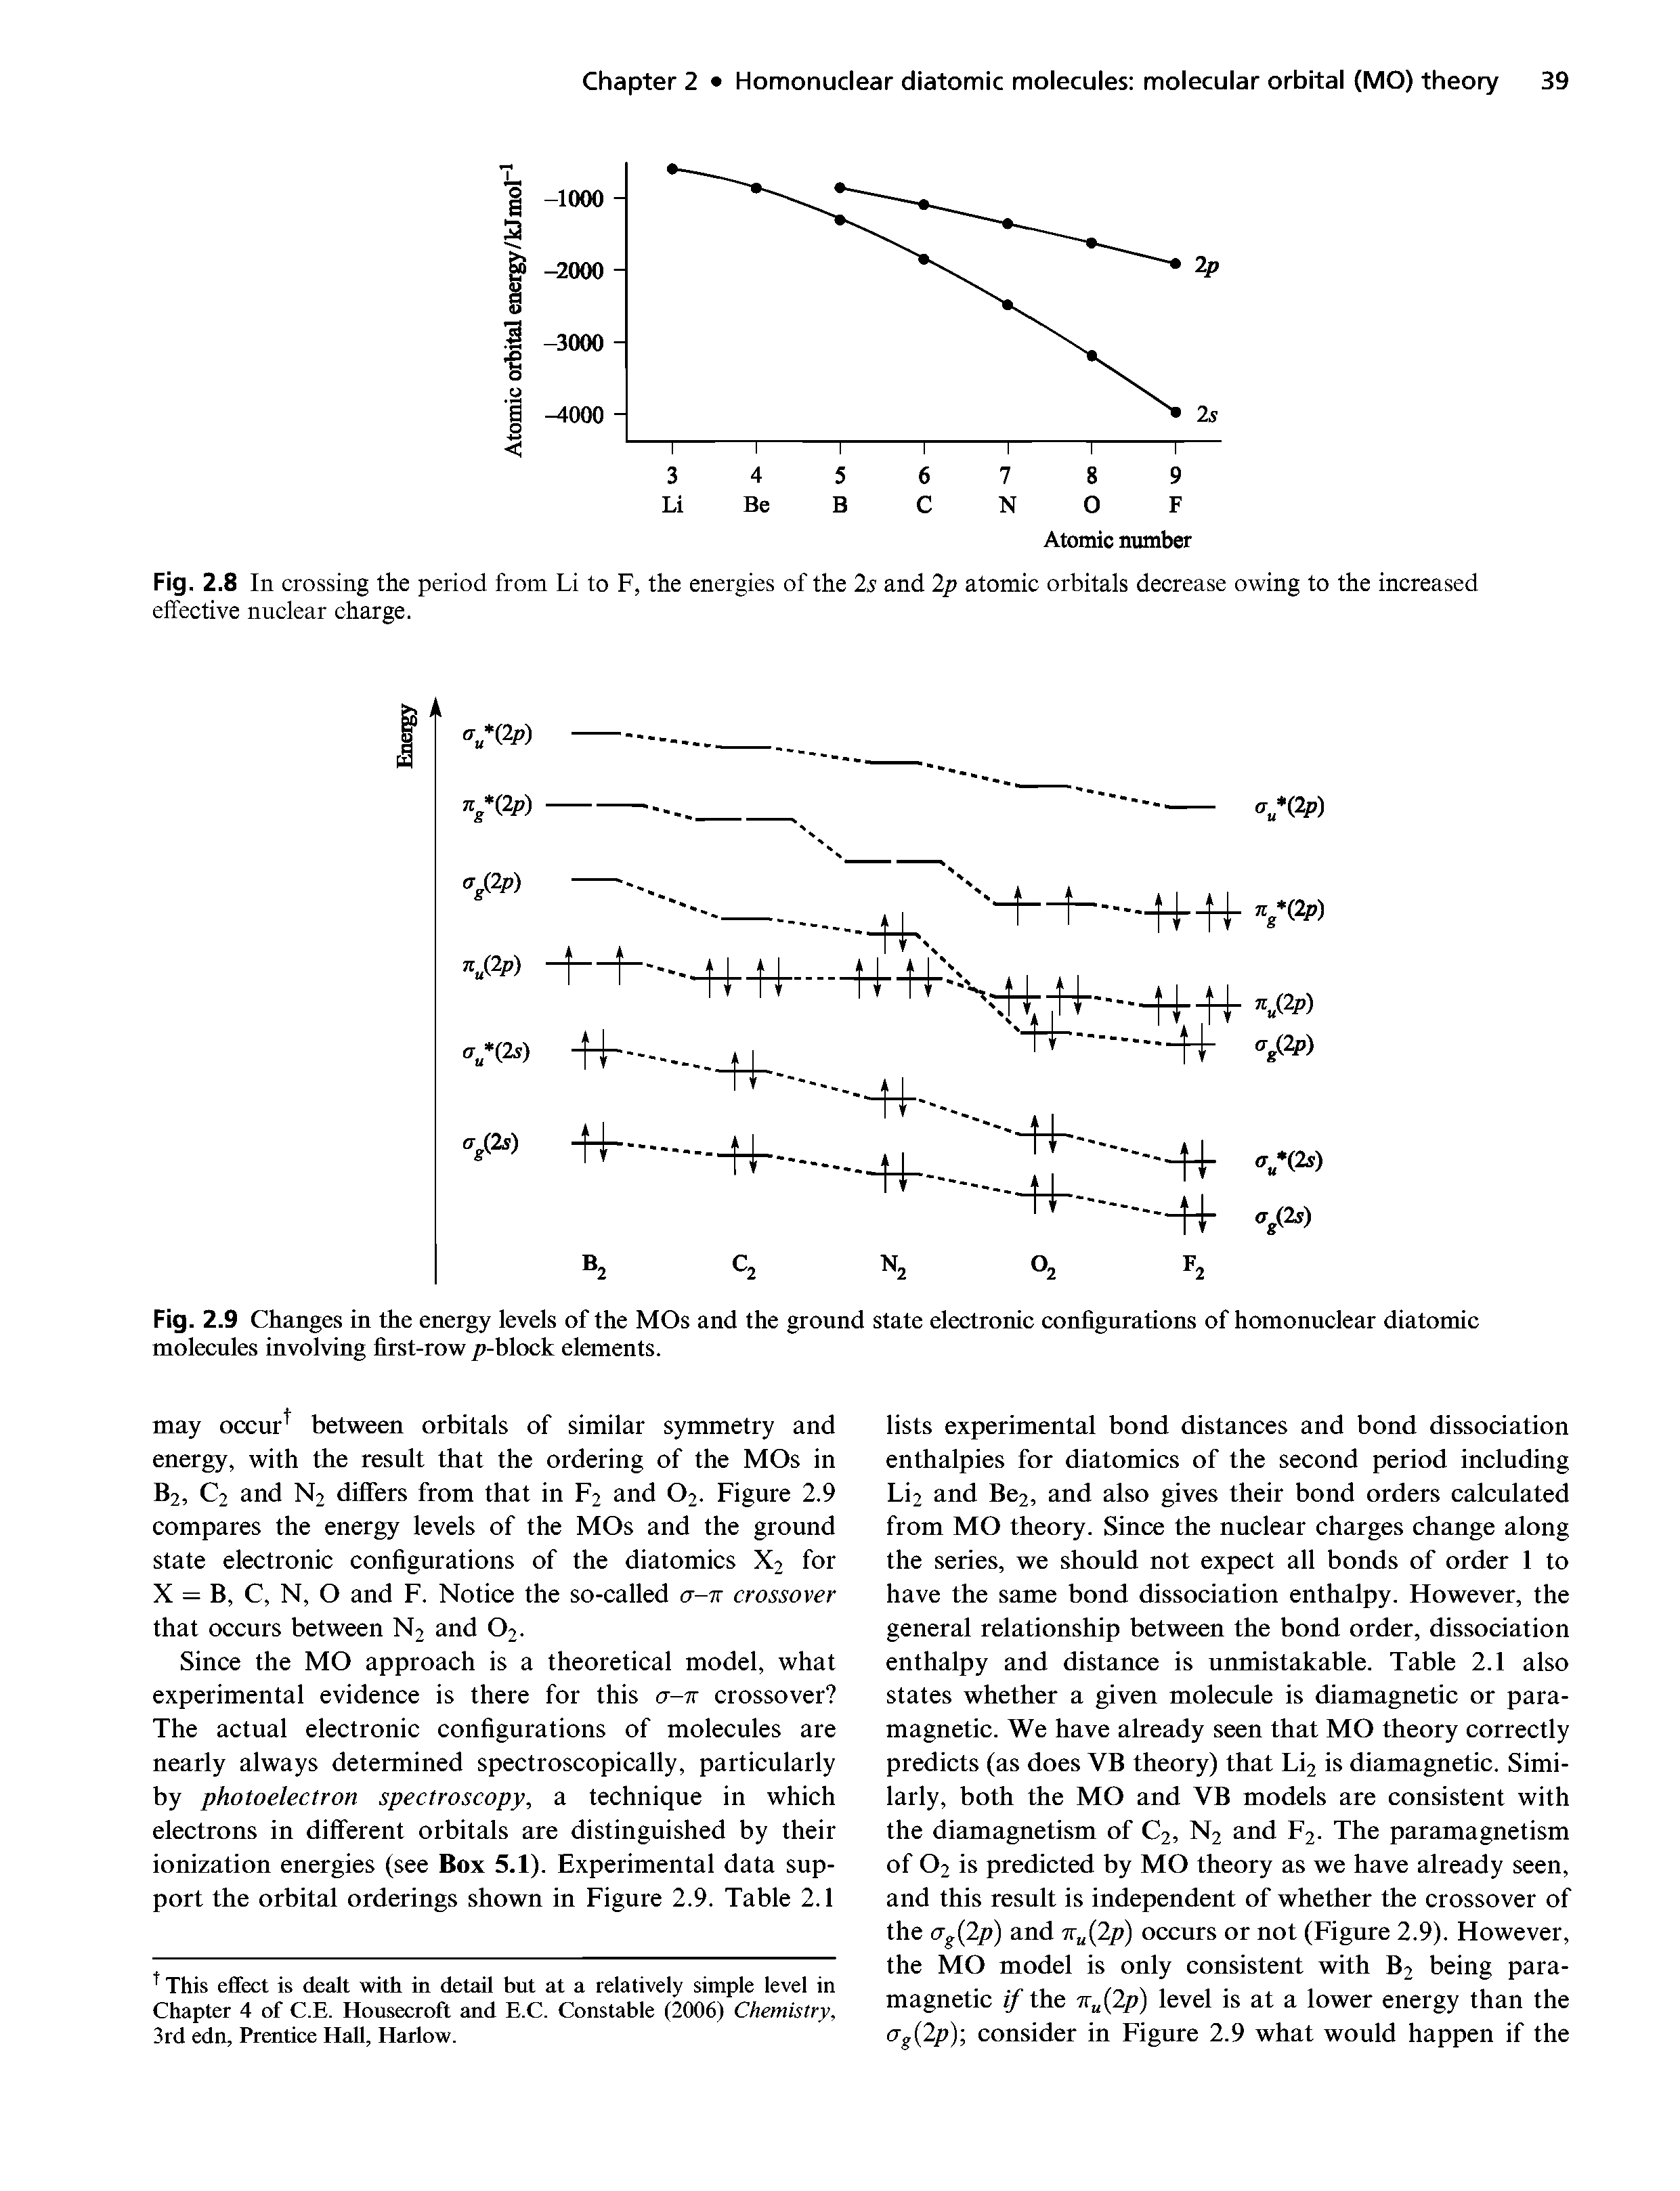 Fig. 2.9 Changes in the energy levels of the MOs and the ground state electronic configurations of homonuclear diatomic molecules involving first-row p-block elements.